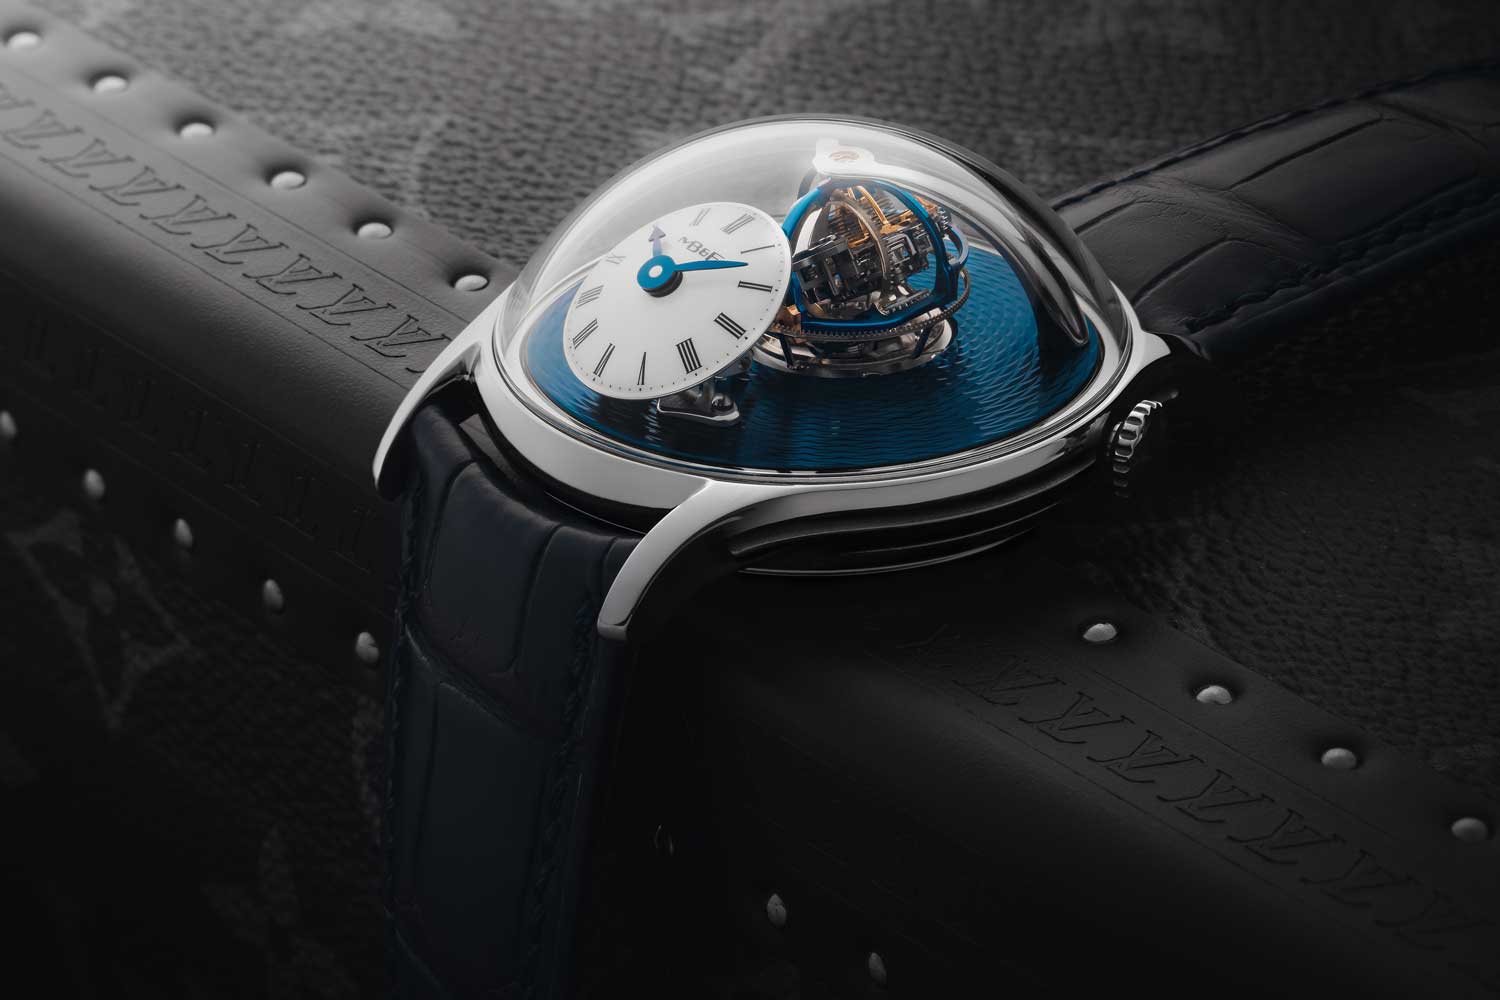 MB&F LM Thunderdome The Hour Glass Commemorative Edition in tantalum